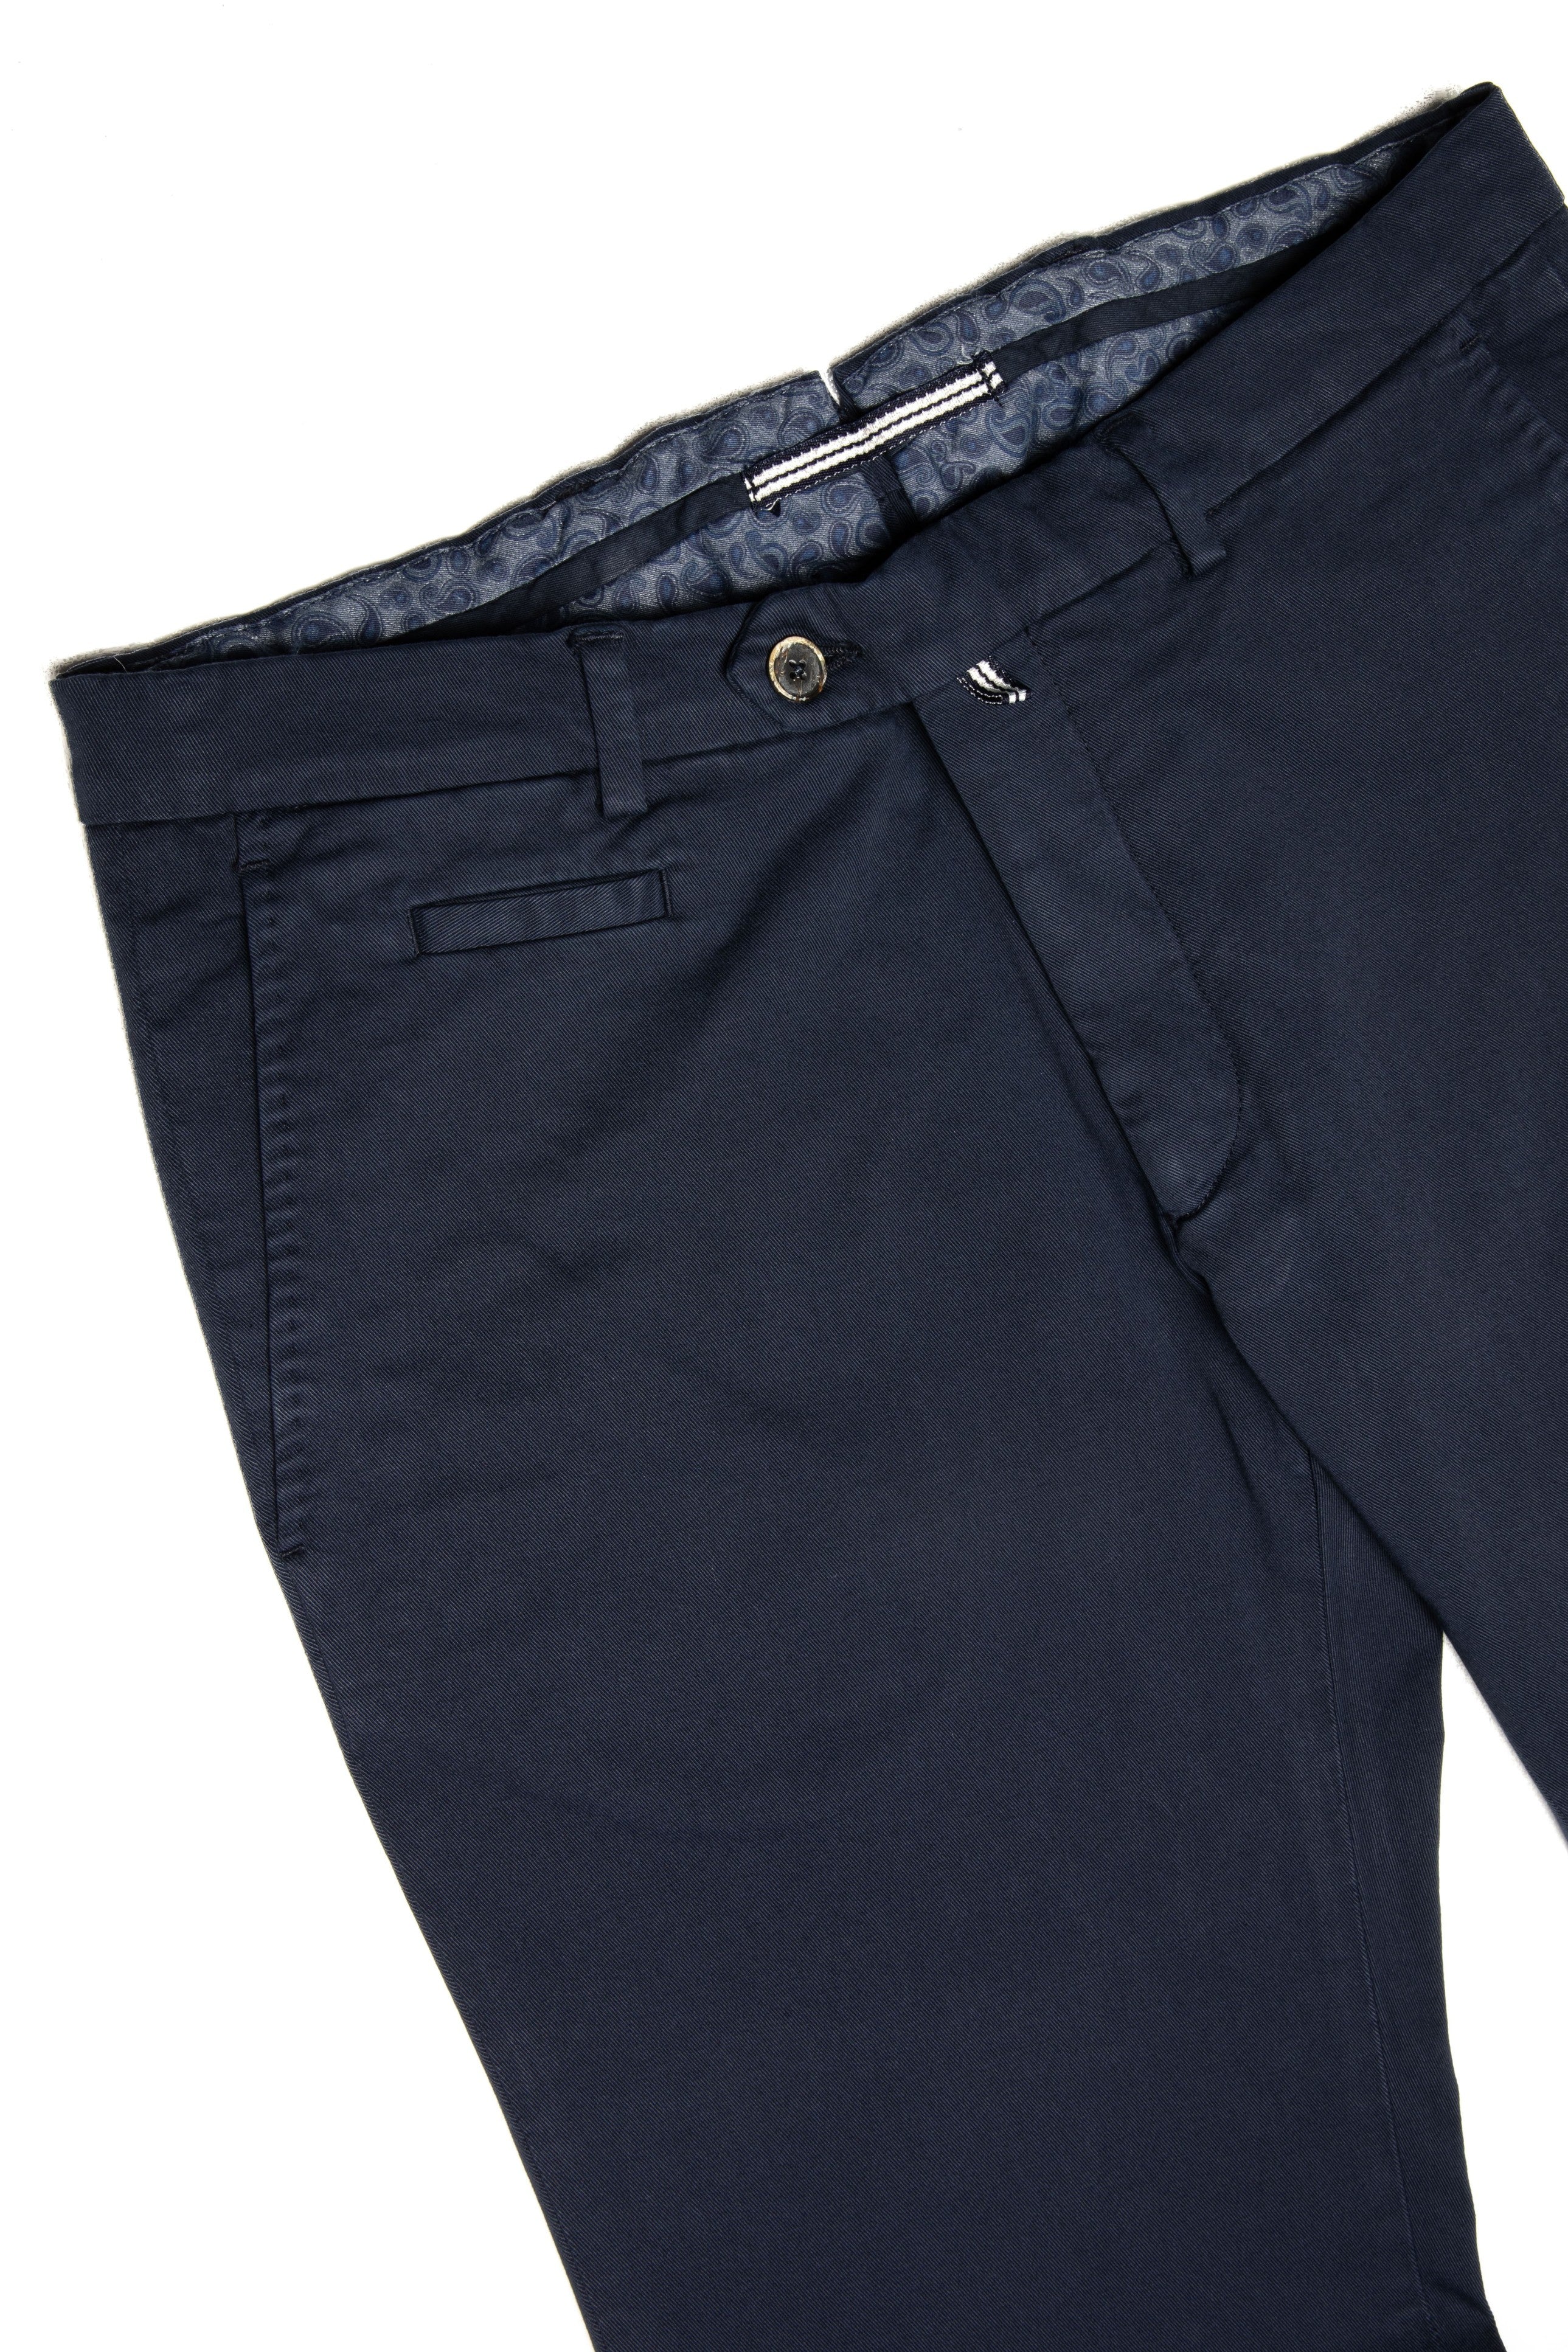 Navy Blue Cotton Casual Chinos